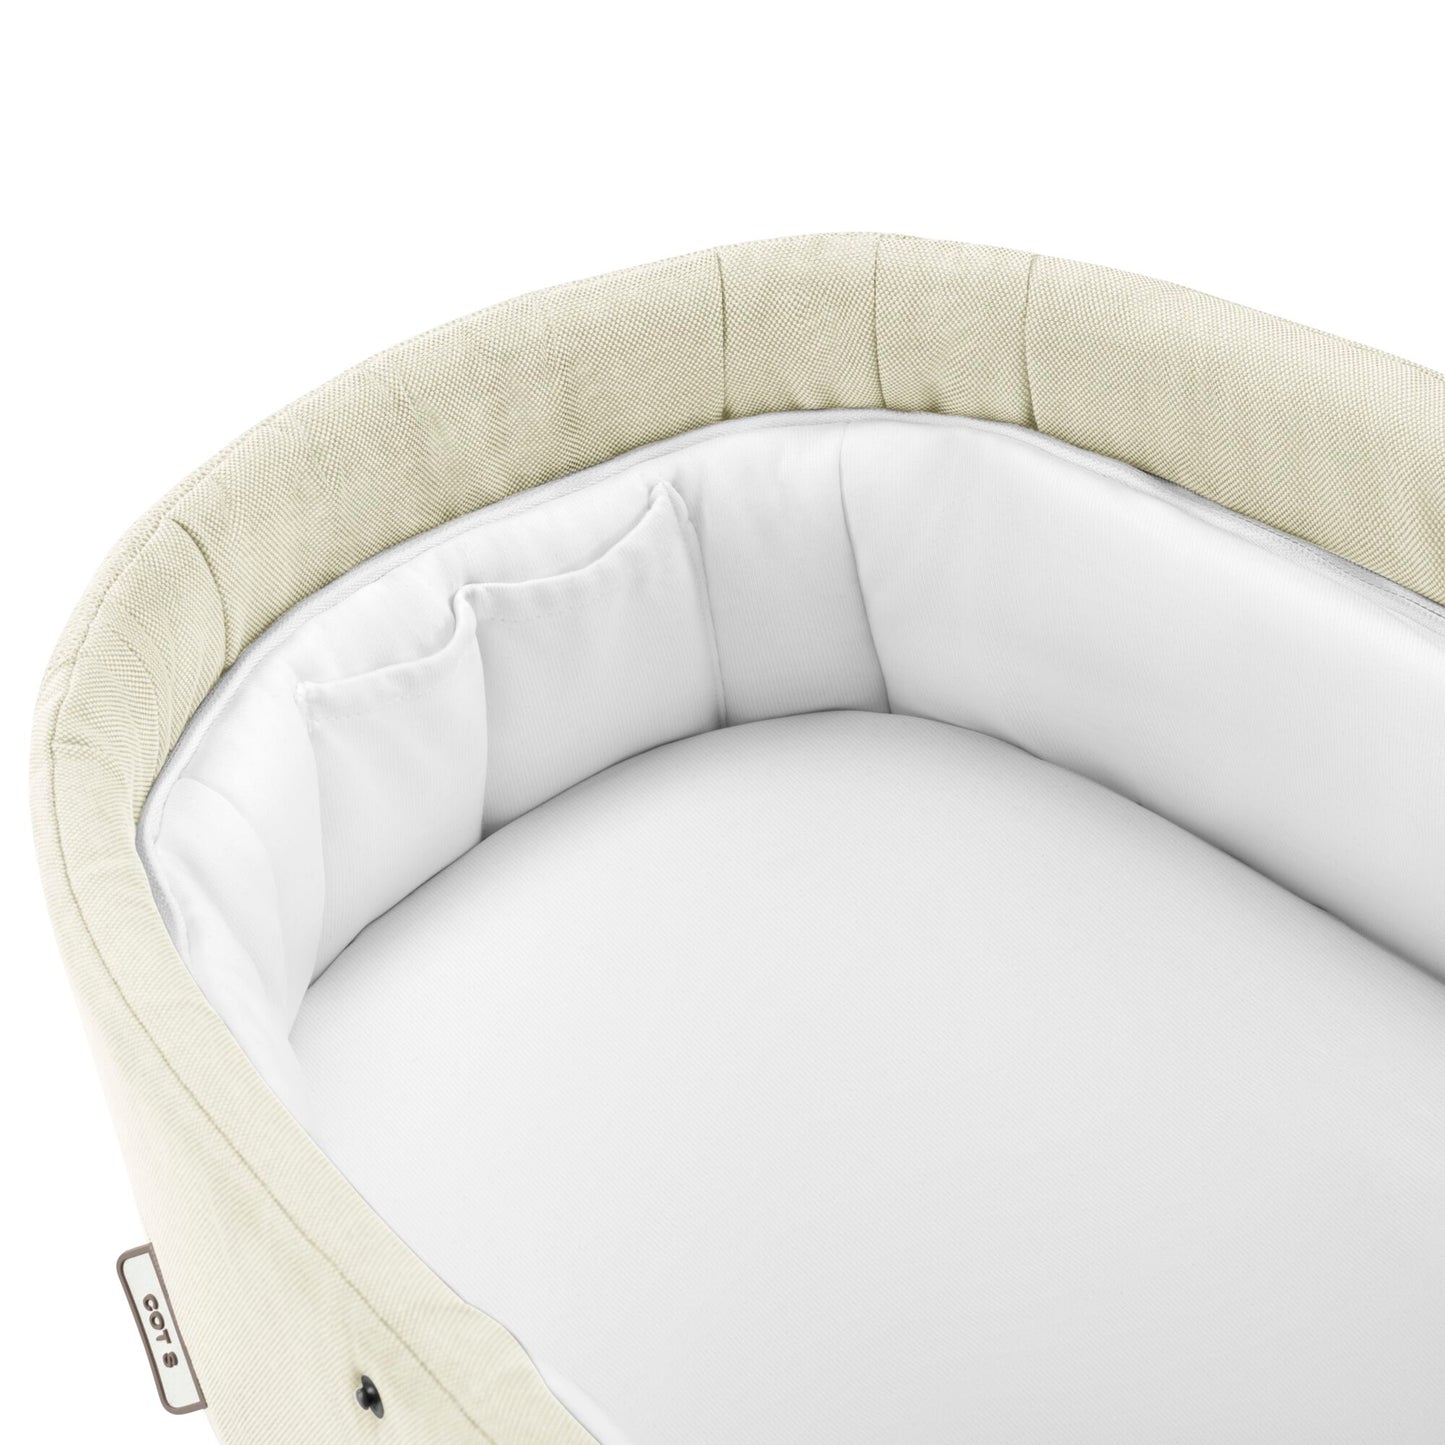 Cybex COT S LUX Carrycot Seashell Beige